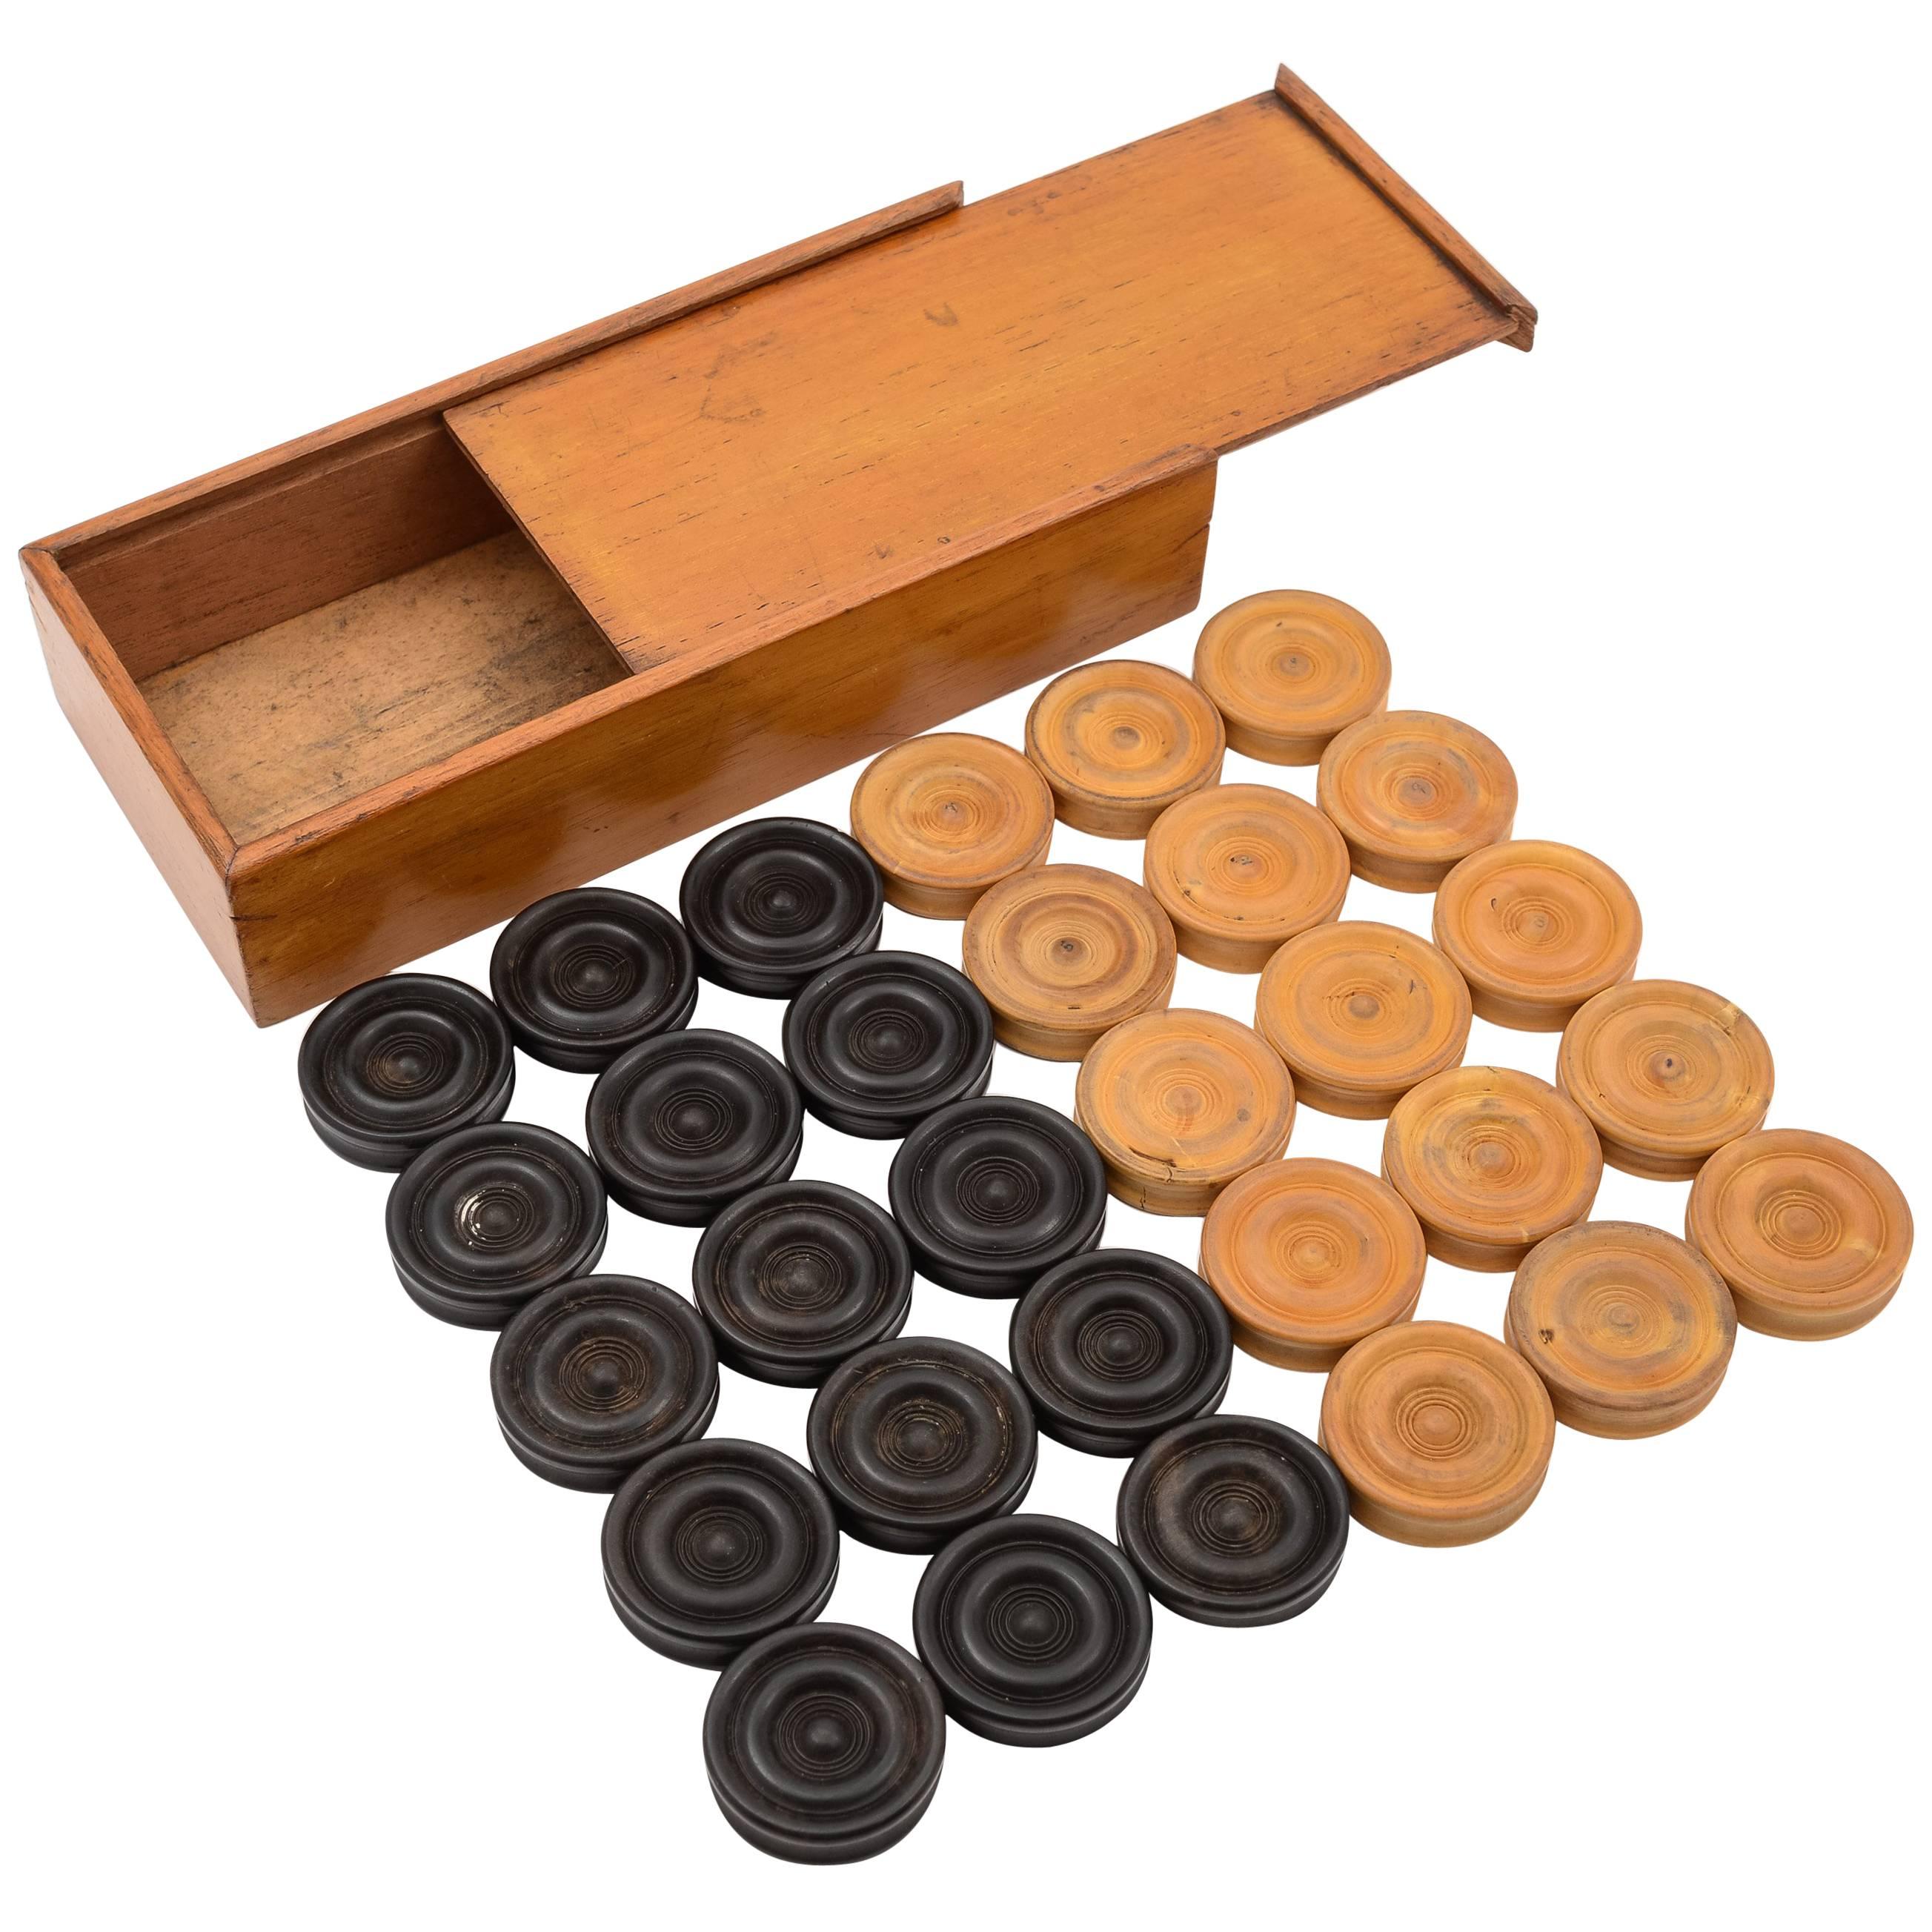 Edwardian Draughts/Backgammon Counters, circa 1905 For Sale